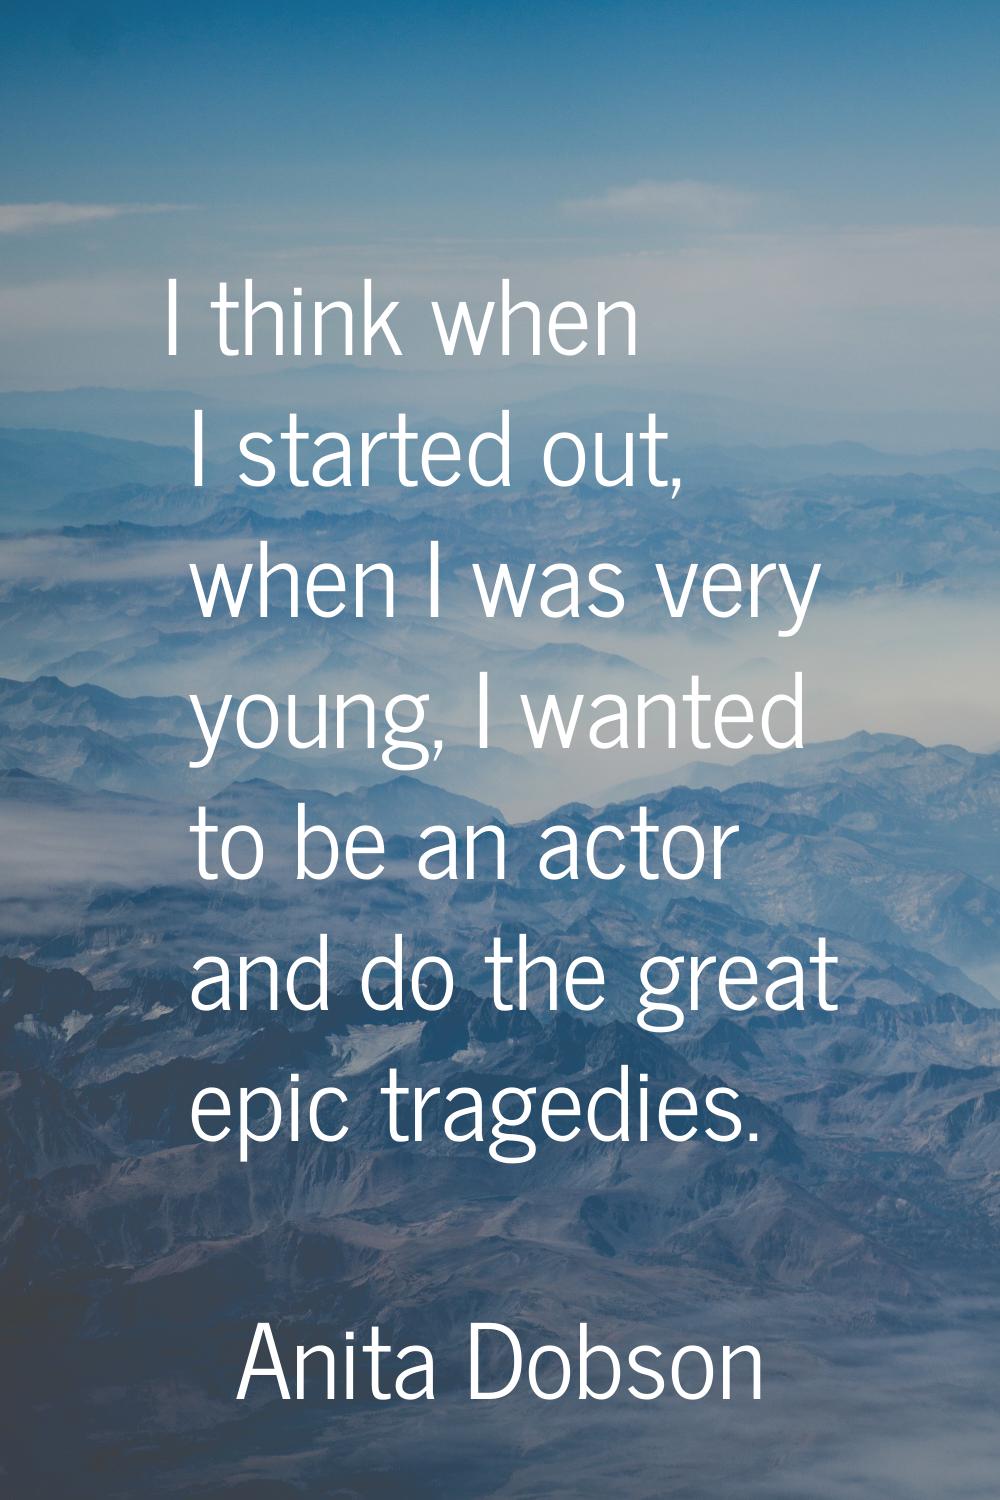 I think when I started out, when I was very young, I wanted to be an actor and do the great epic tr